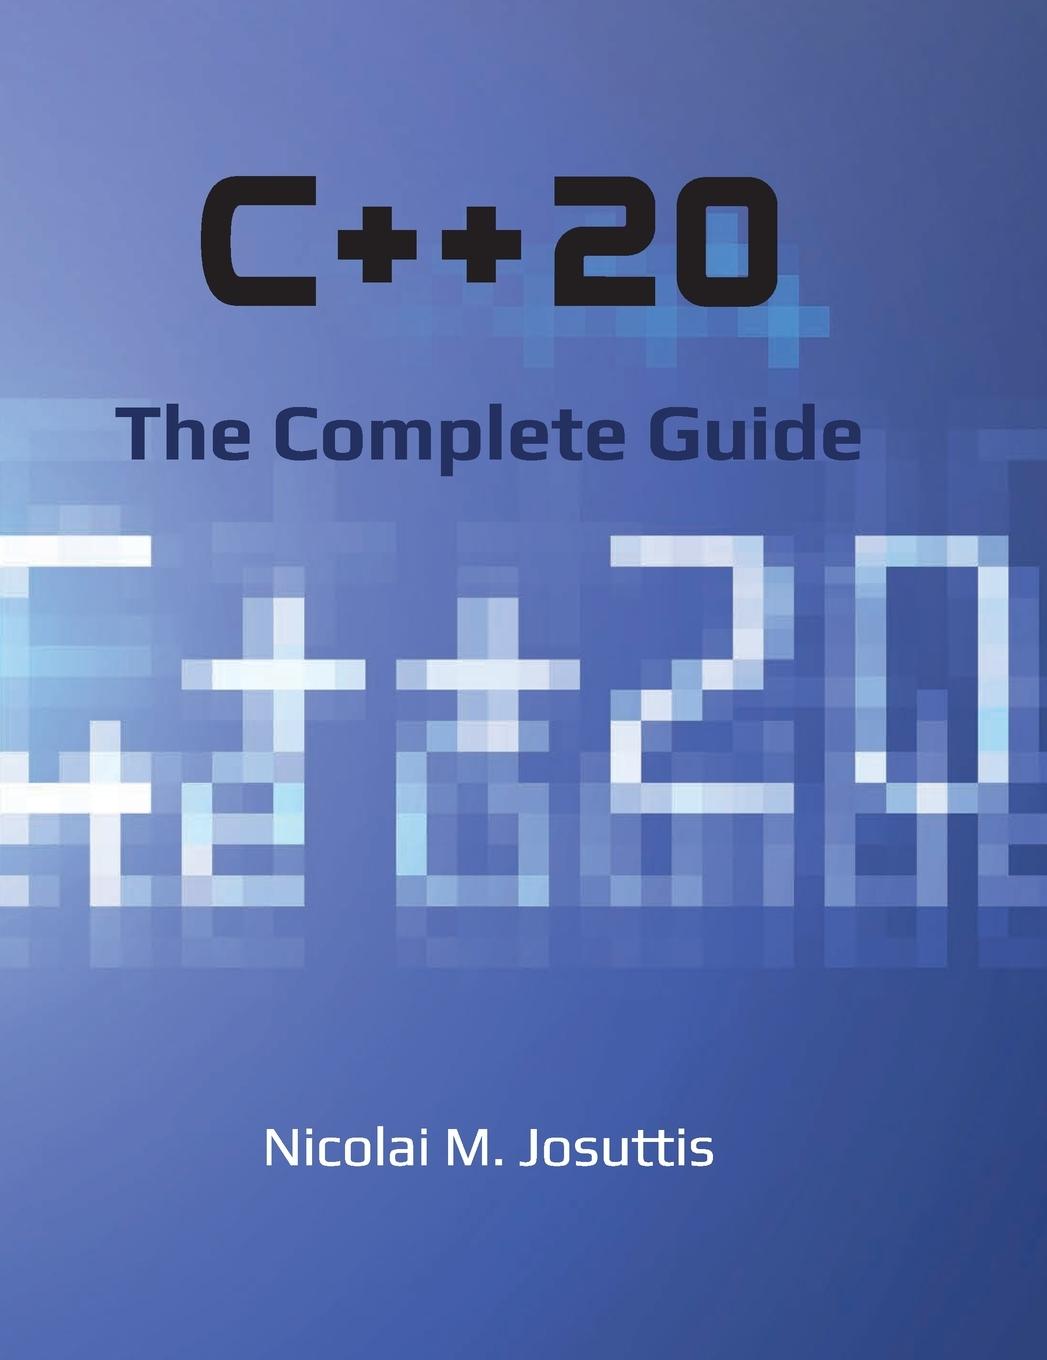 Könyv C++20 - The Complete Guide 